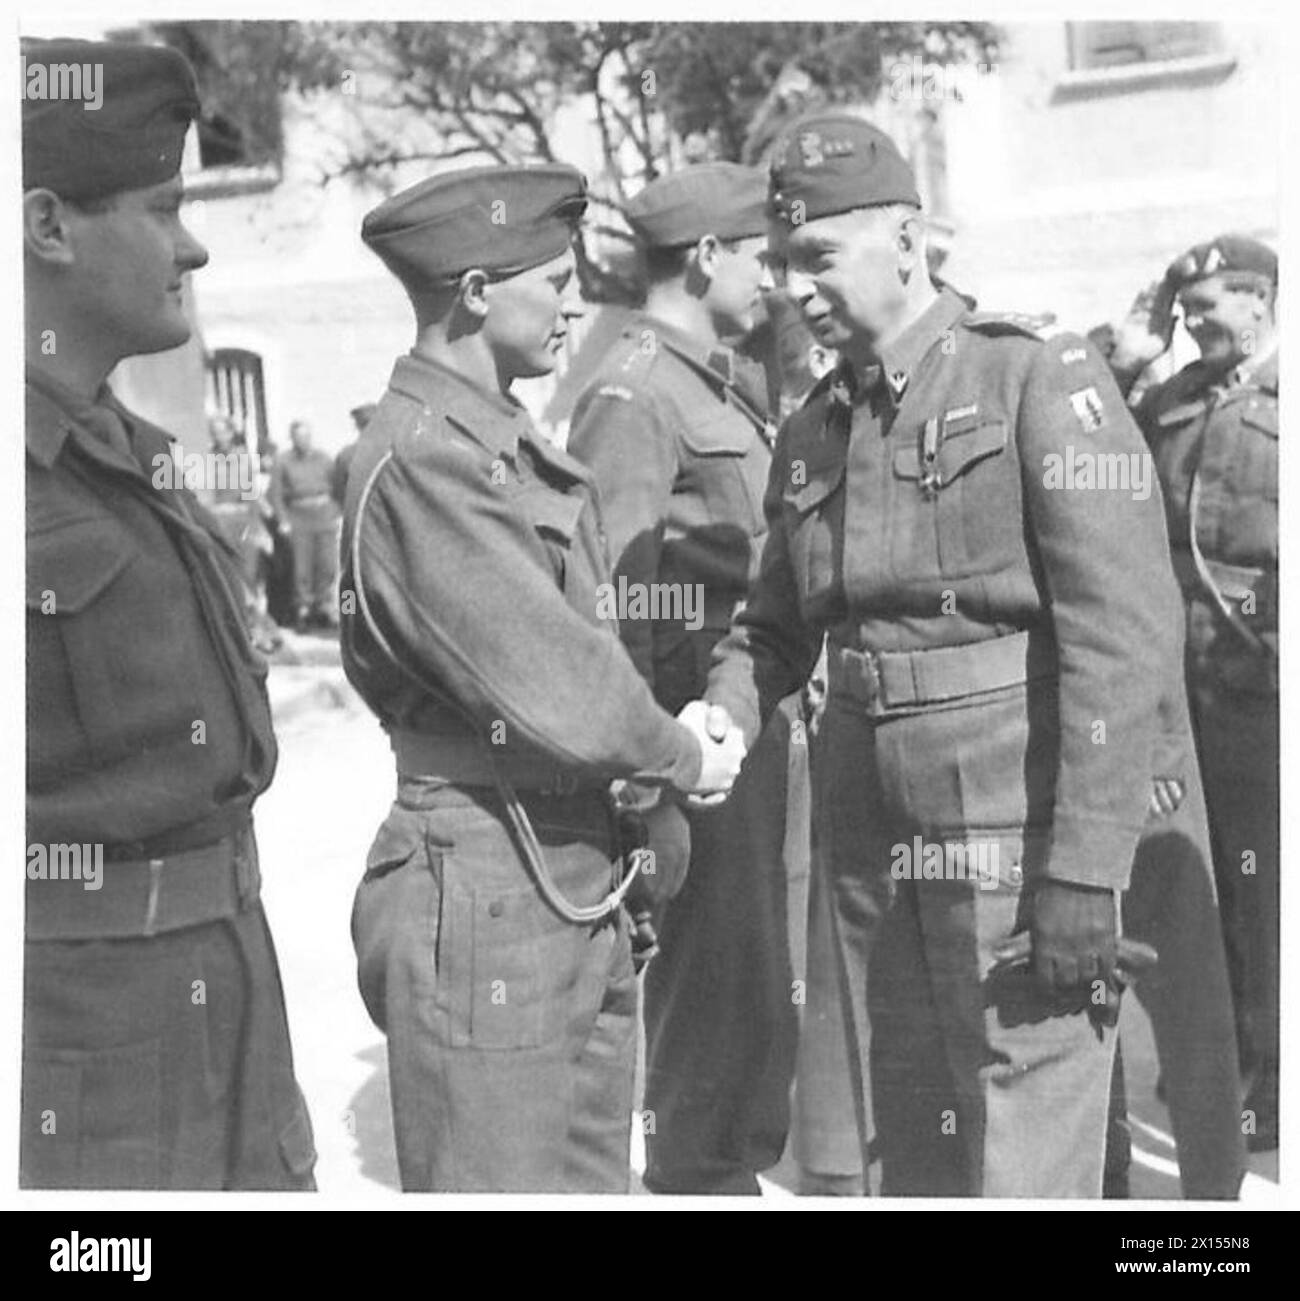 THE POLISH ARMY IN THE ITALIAN CAMPAIGN, 1943-1945 - General Kazimierz Sosnkowski, the C-in-C of the Polish Armed Forces, shaking hands with an officer of one of the 2nd Polish Corps' units during his visit to the formation. Zygmunt Bohusz-Szyszko, the Deputy Commander of the Corps, is in the background, saluting. General Sosnkowski is displaying the 3rd Carpathian Rifles Division badge on his left shoulder so it might be one of the Division's units he is inspecting.Photograph taken at Carpinone, 2 April 1944 Polish Army, Polish Armed Forces in the West, Polish Corps, II, Polish Armed Forces i Stock Photo